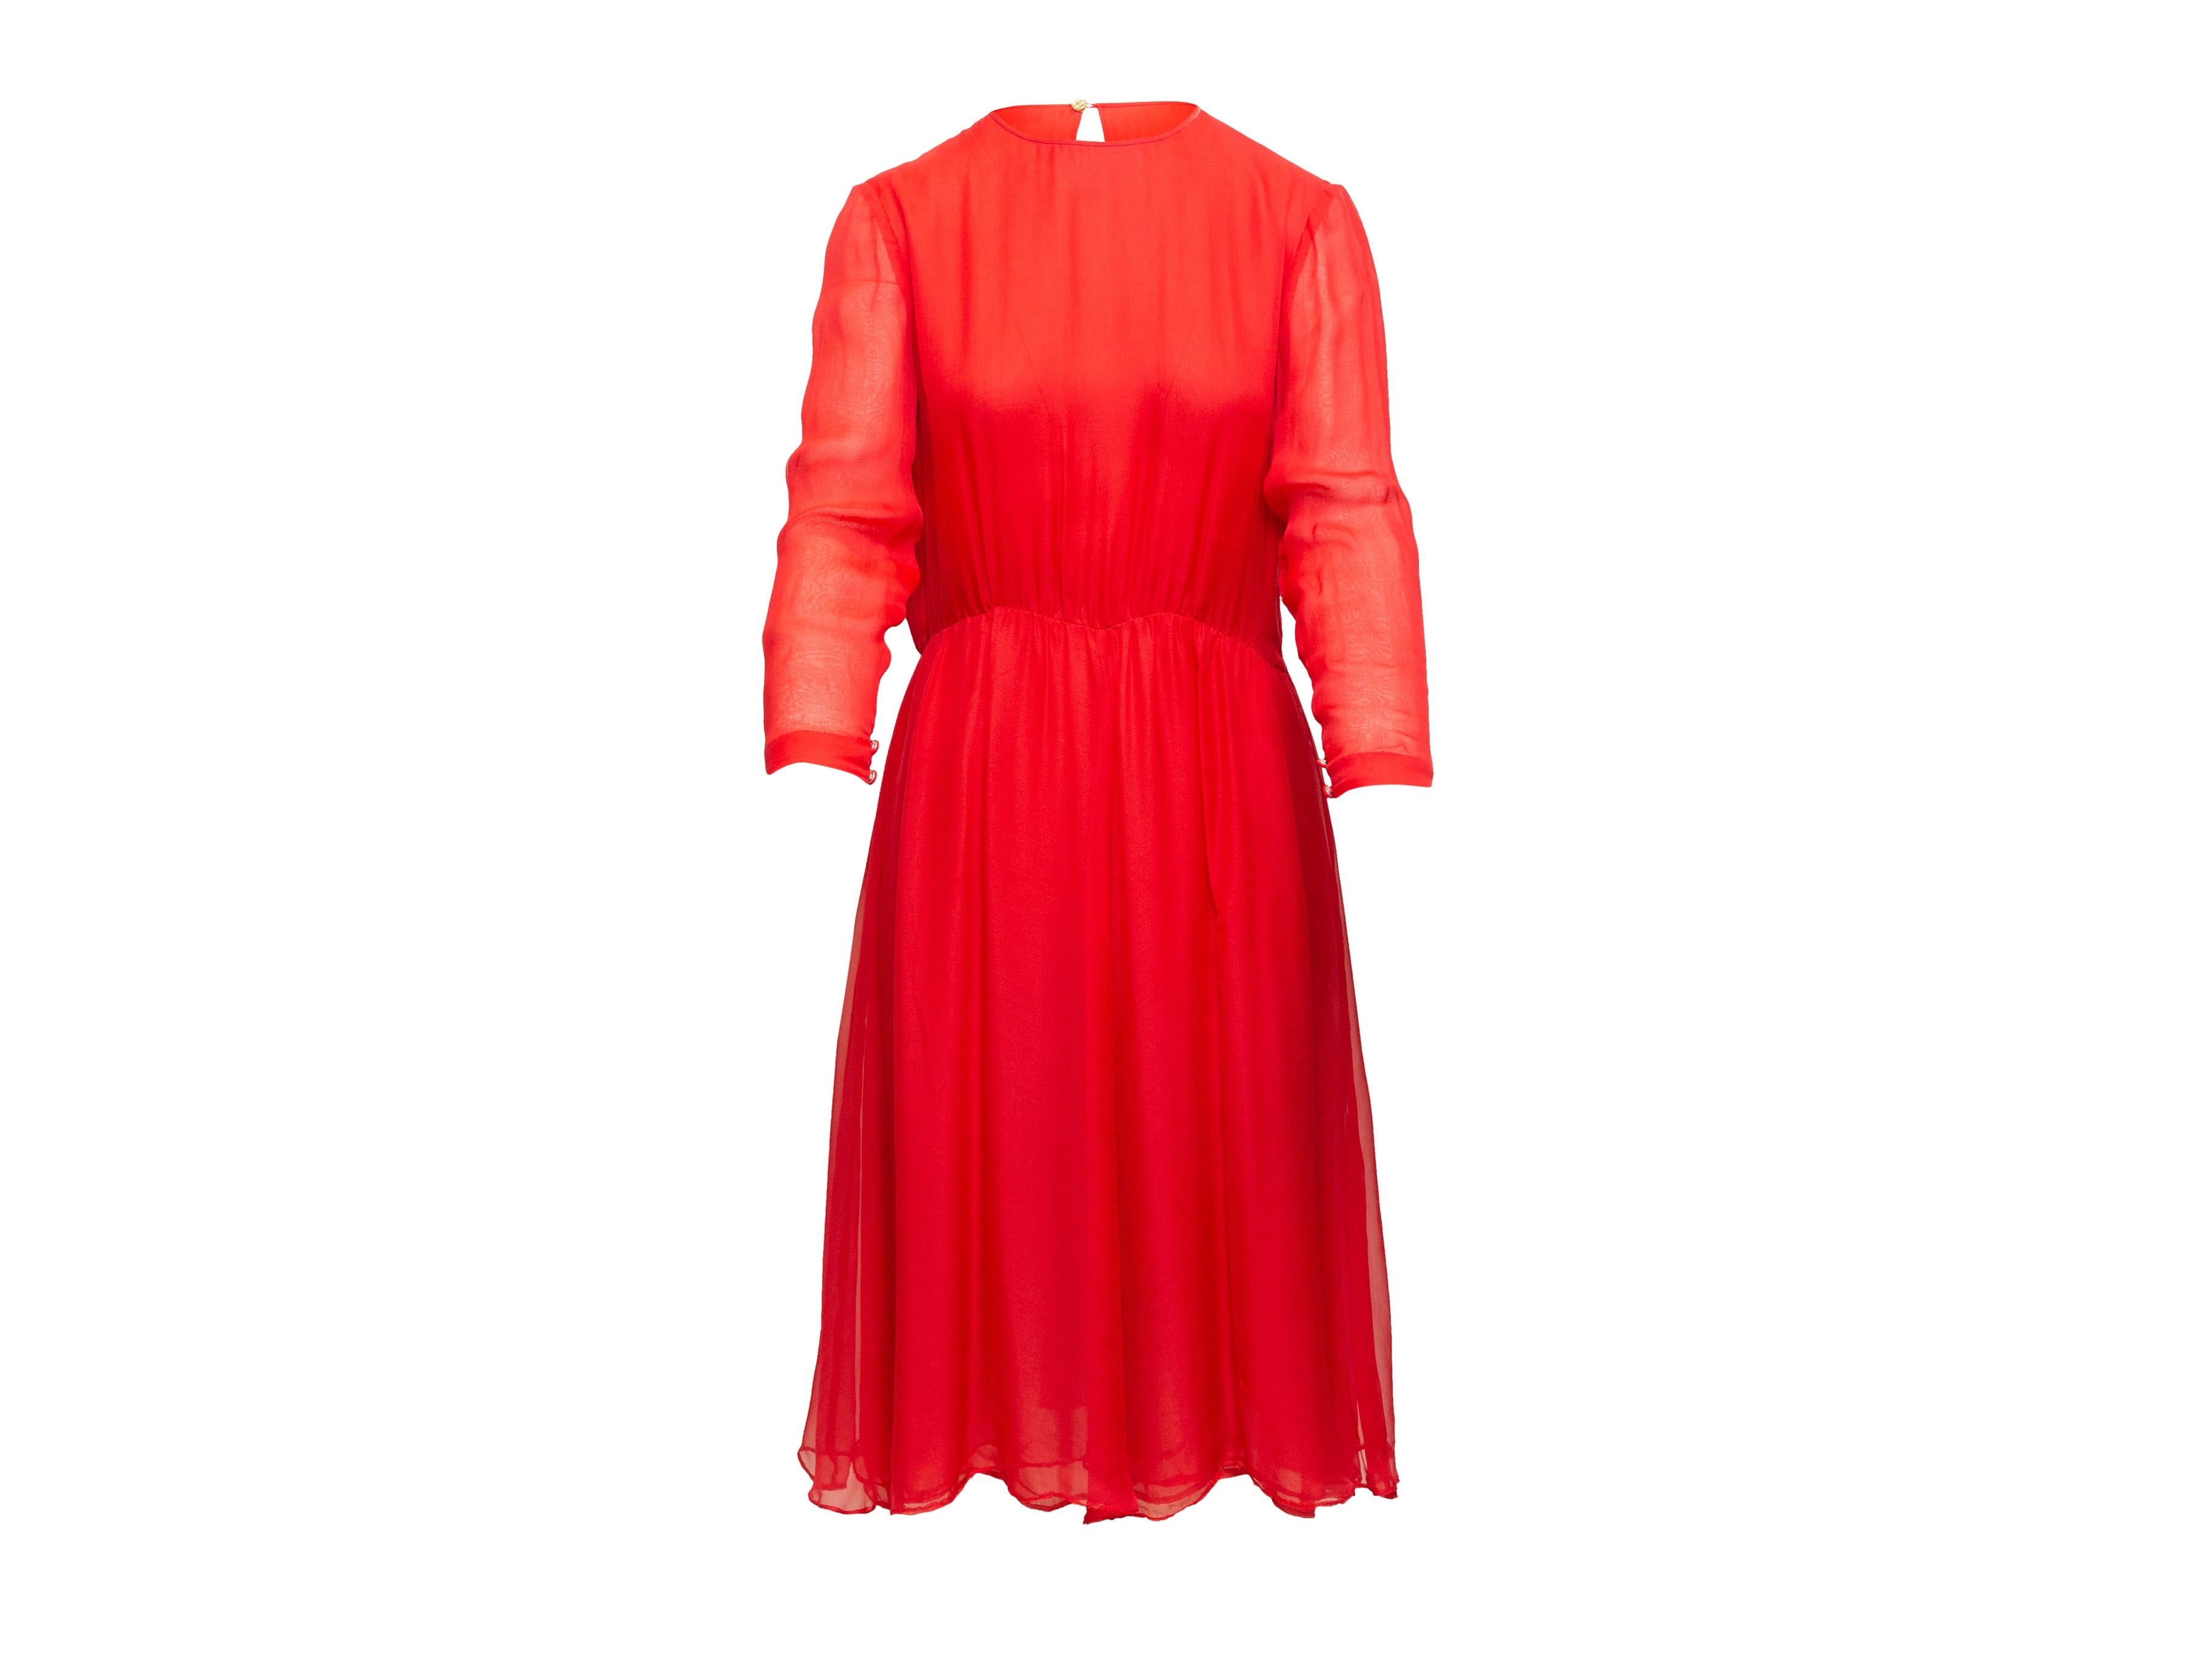 Product details: Vintage red silk midi dress by Chanel Creations. Crew neck. Long sleeves. Button closure at nape. 35